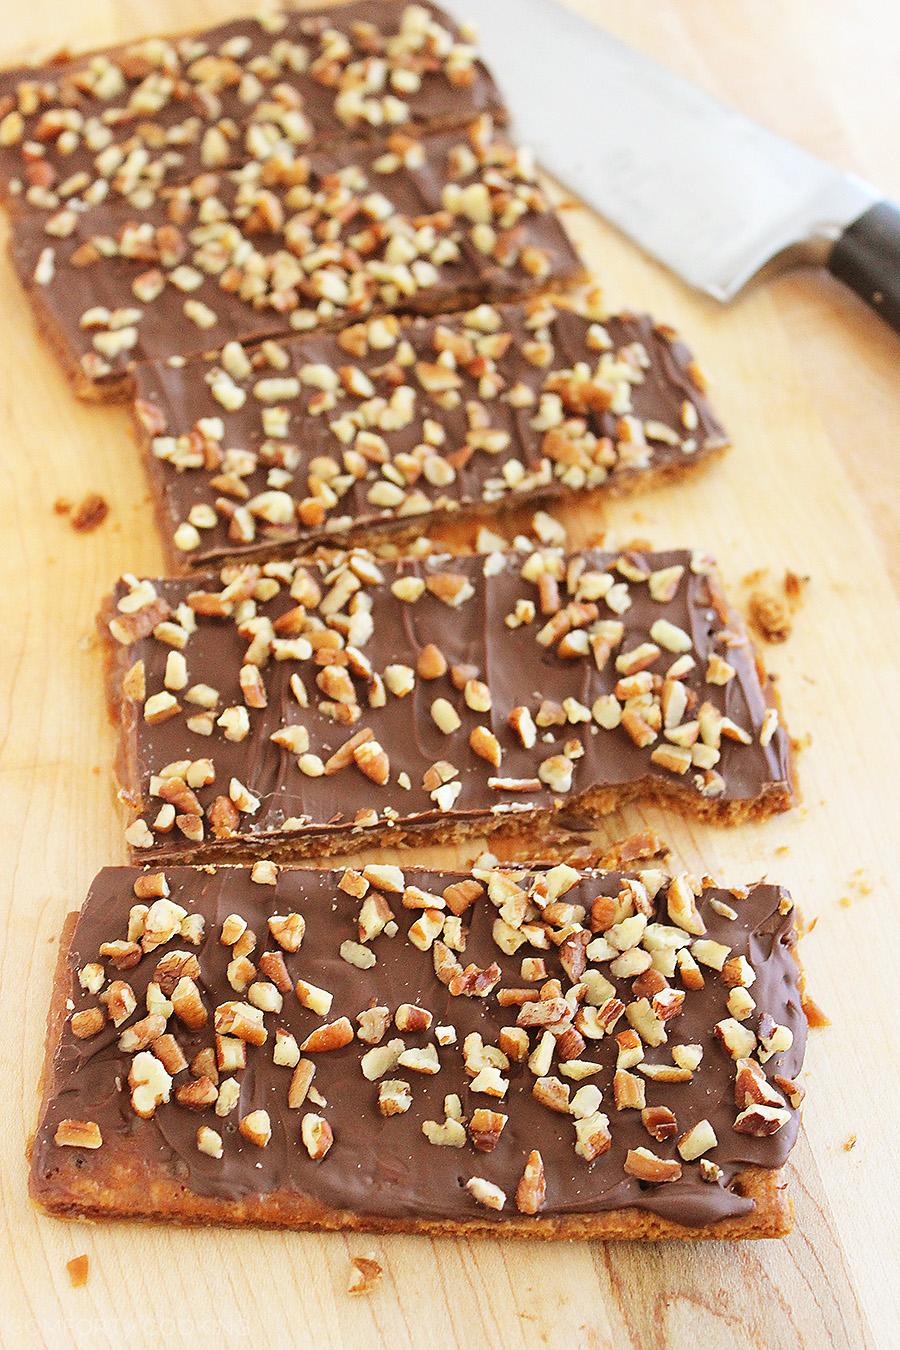 5-Ingredient Graham Cracker Toffee - Crisp, buttery (and very addictive) graham cracker toffee totally hits the spot for everyone's sweet tooth! Just 5 ingredients and 15 minutes, and easier than any cookie.| thecomfortofcooking.com